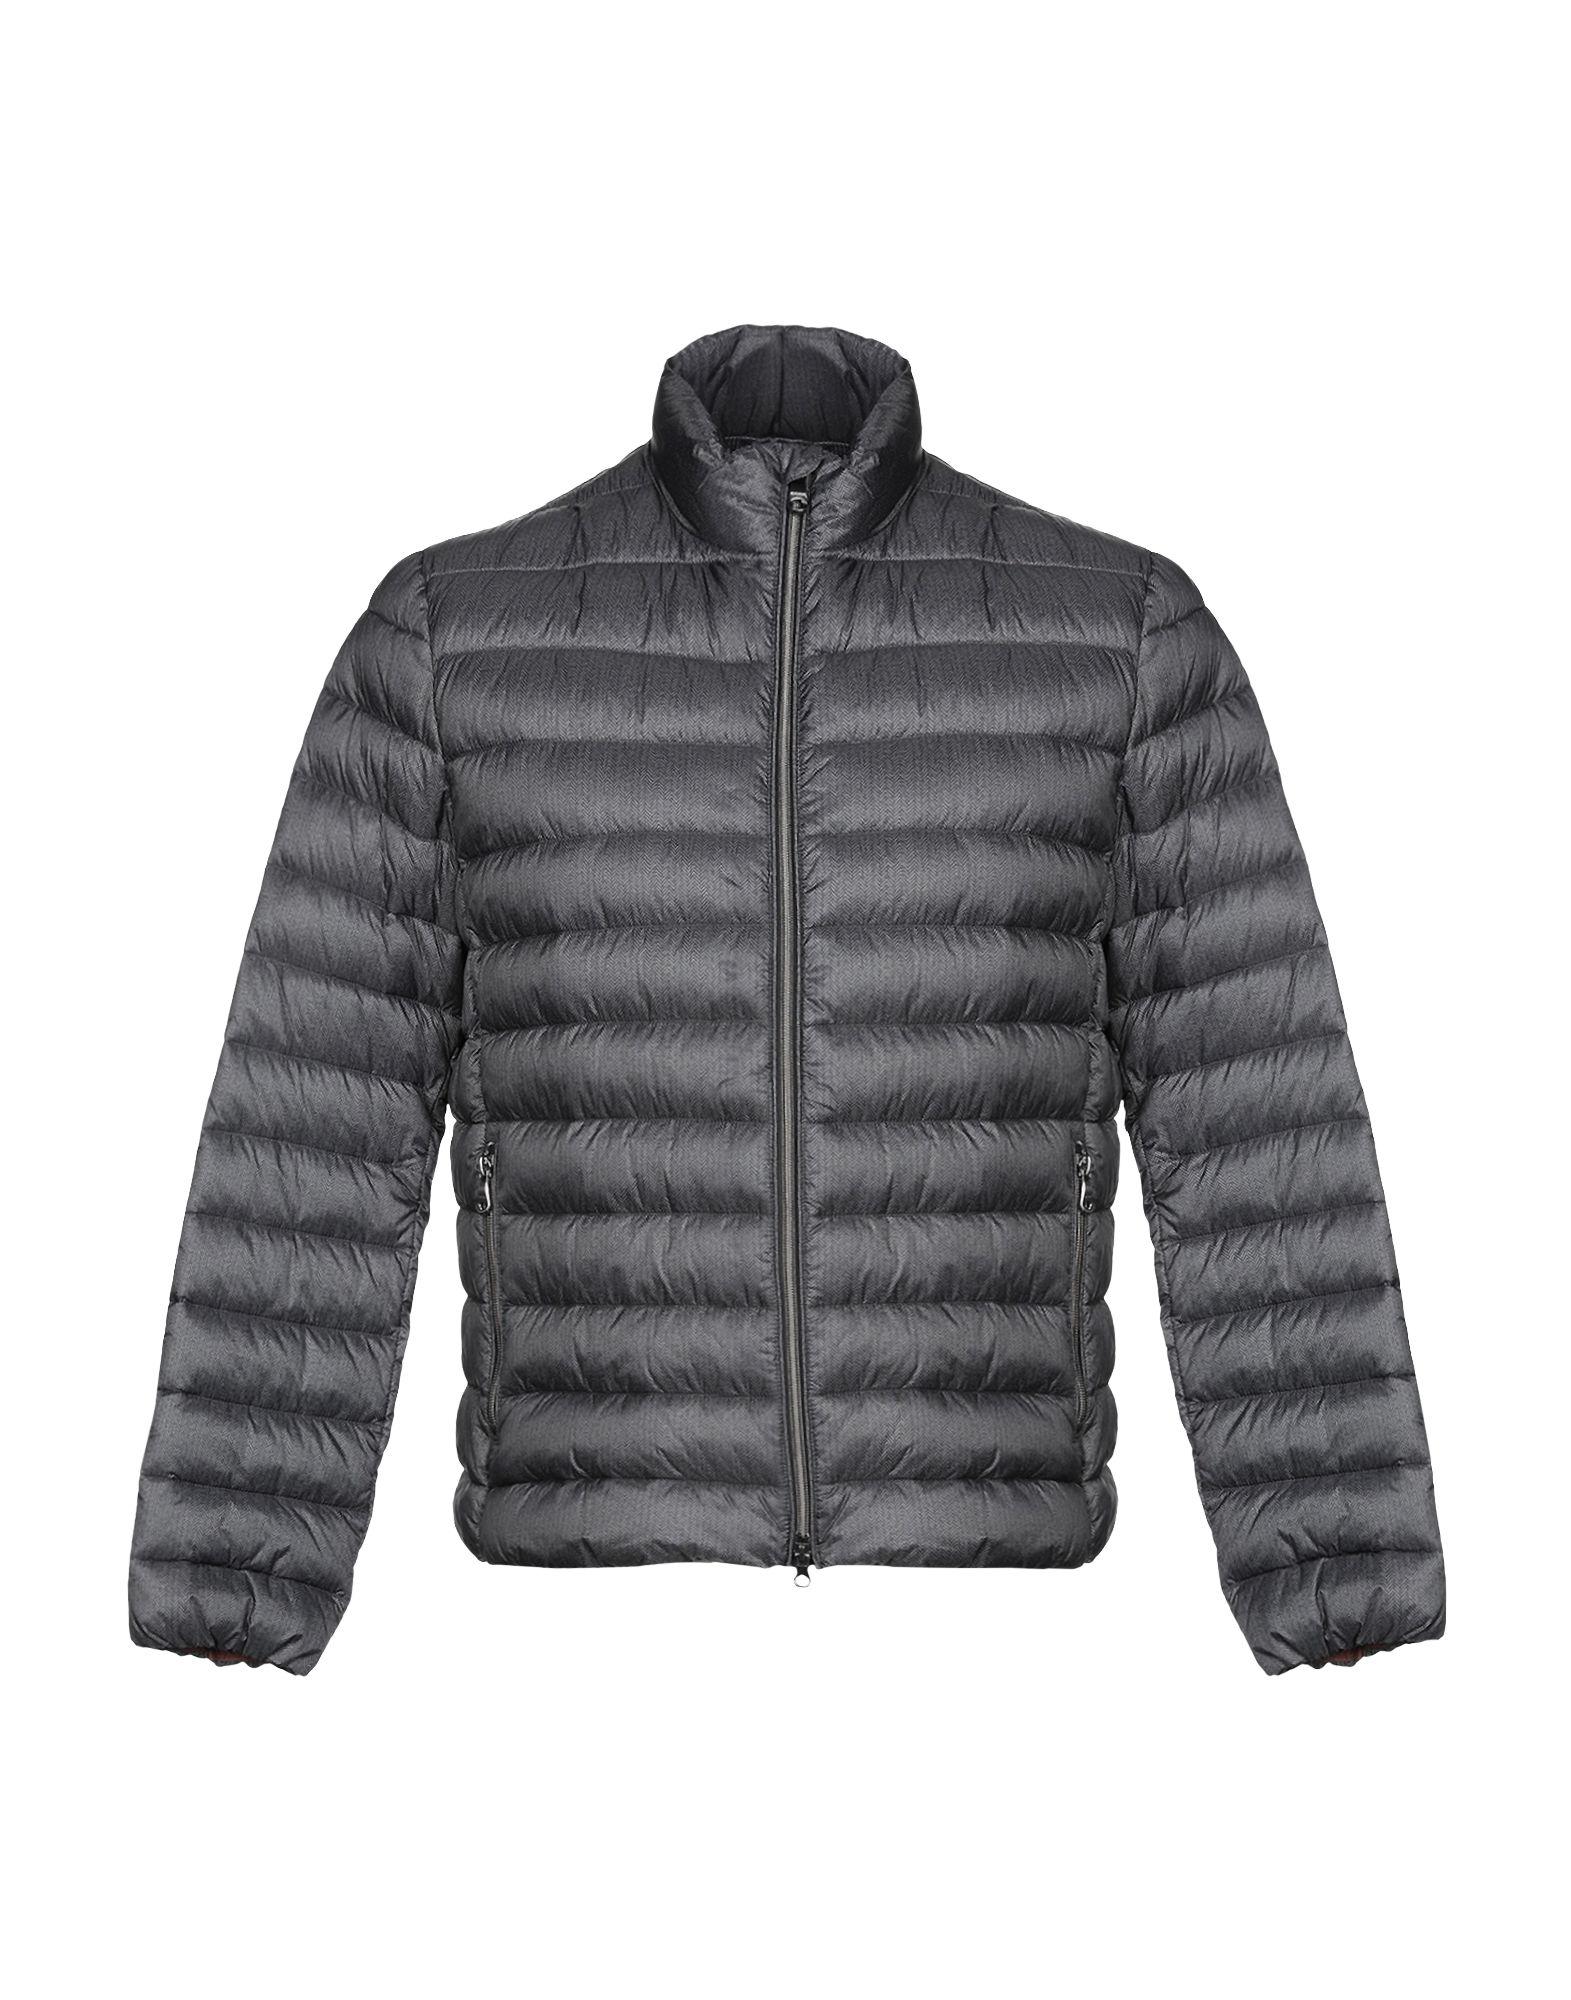 Geox Synthetic Down Jacket in Gray for Men - Lyst